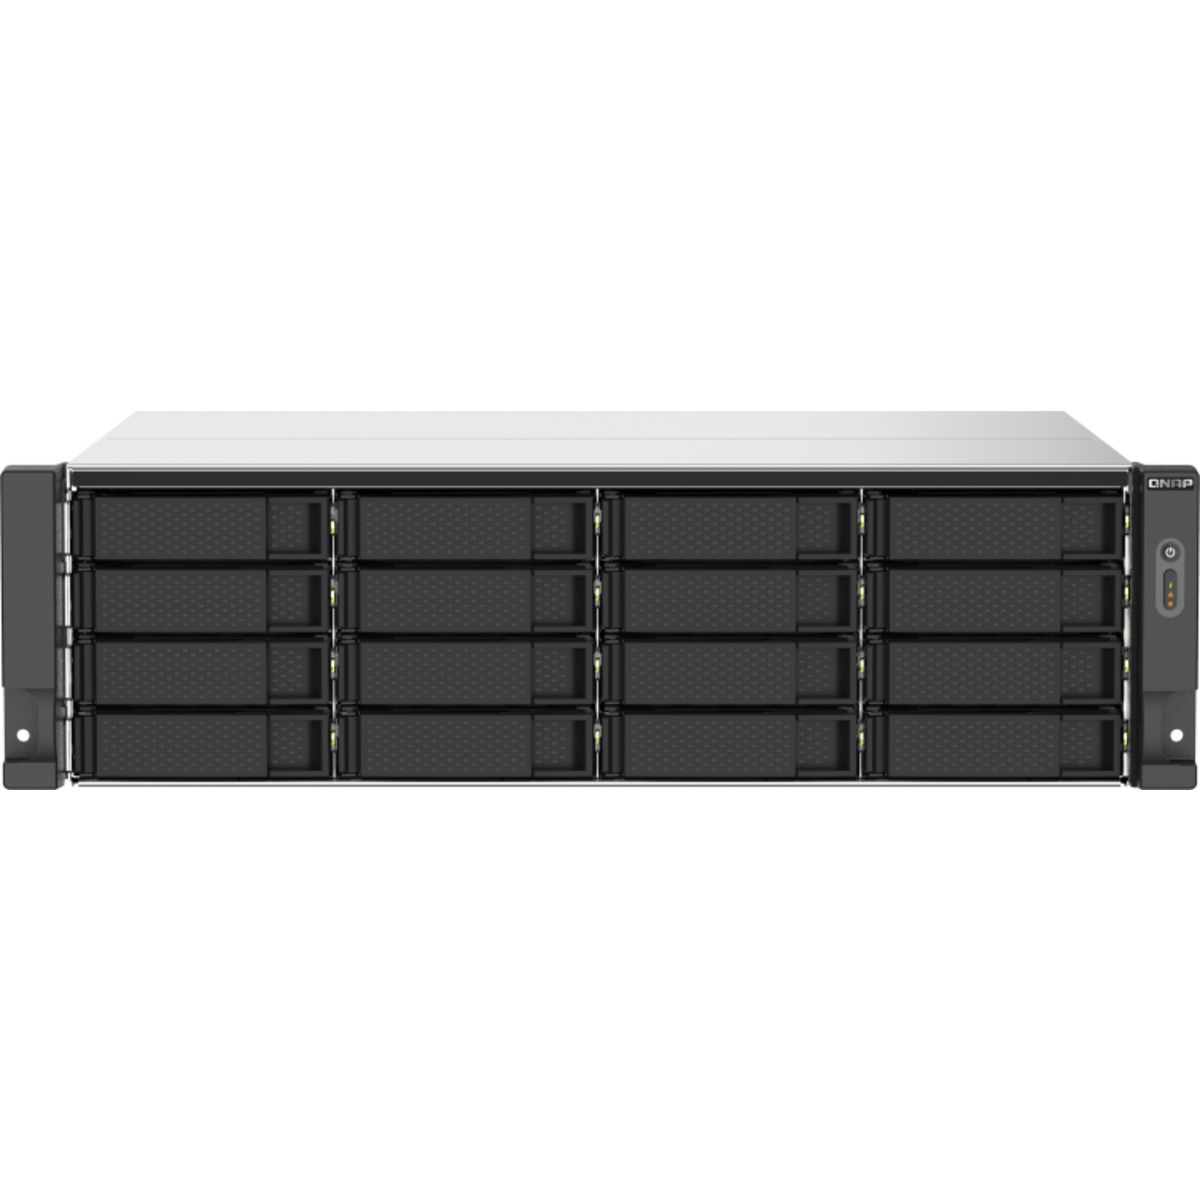 QNAP TS-1673AU-RP 168tb 16-Bay RackMount Multimedia / Power User / Business NAS - Network Attached Storage Device 12x14tb Western Digital Red Pro WD142KFGX 3.5 7200rpm SATA 6Gb/s HDD NAS Class Drives Installed - Burn-In Tested - FREE RAM UPGRADE TS-1673AU-RP